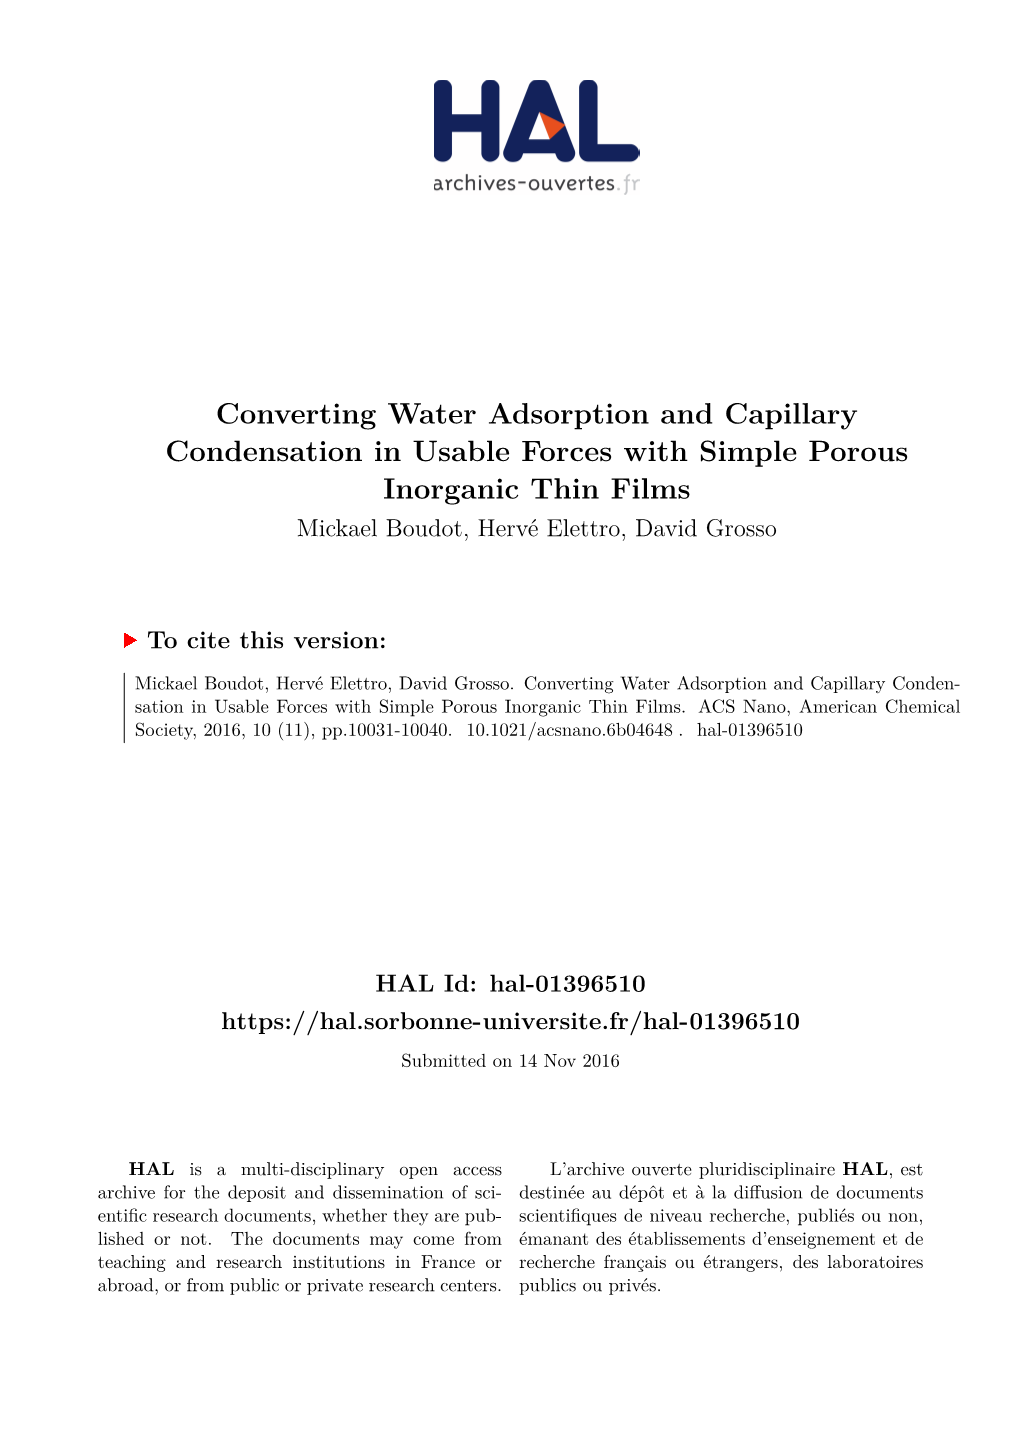 Converting Water Adsorption and Capillary Condensation in Usable Forces with Simple Porous Inorganic Thin Films Mickael Boudot, Hervé Elettro, David Grosso